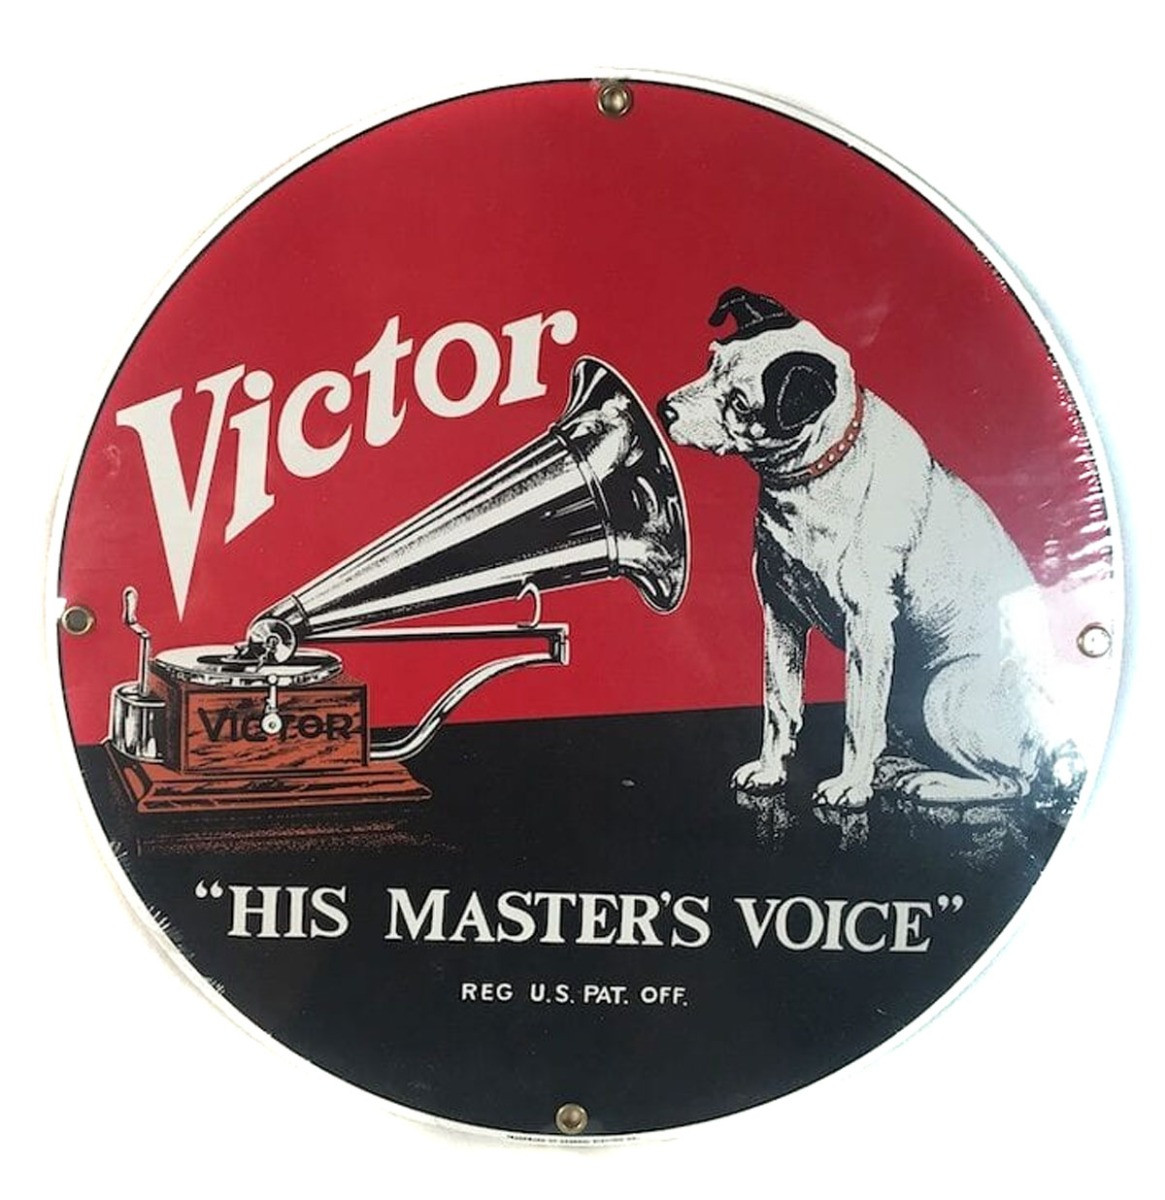 RCA Victor: His Master&apos;s Voice Emaille Bord - 29 cm ø - Ande Rooney 1990&apos;s